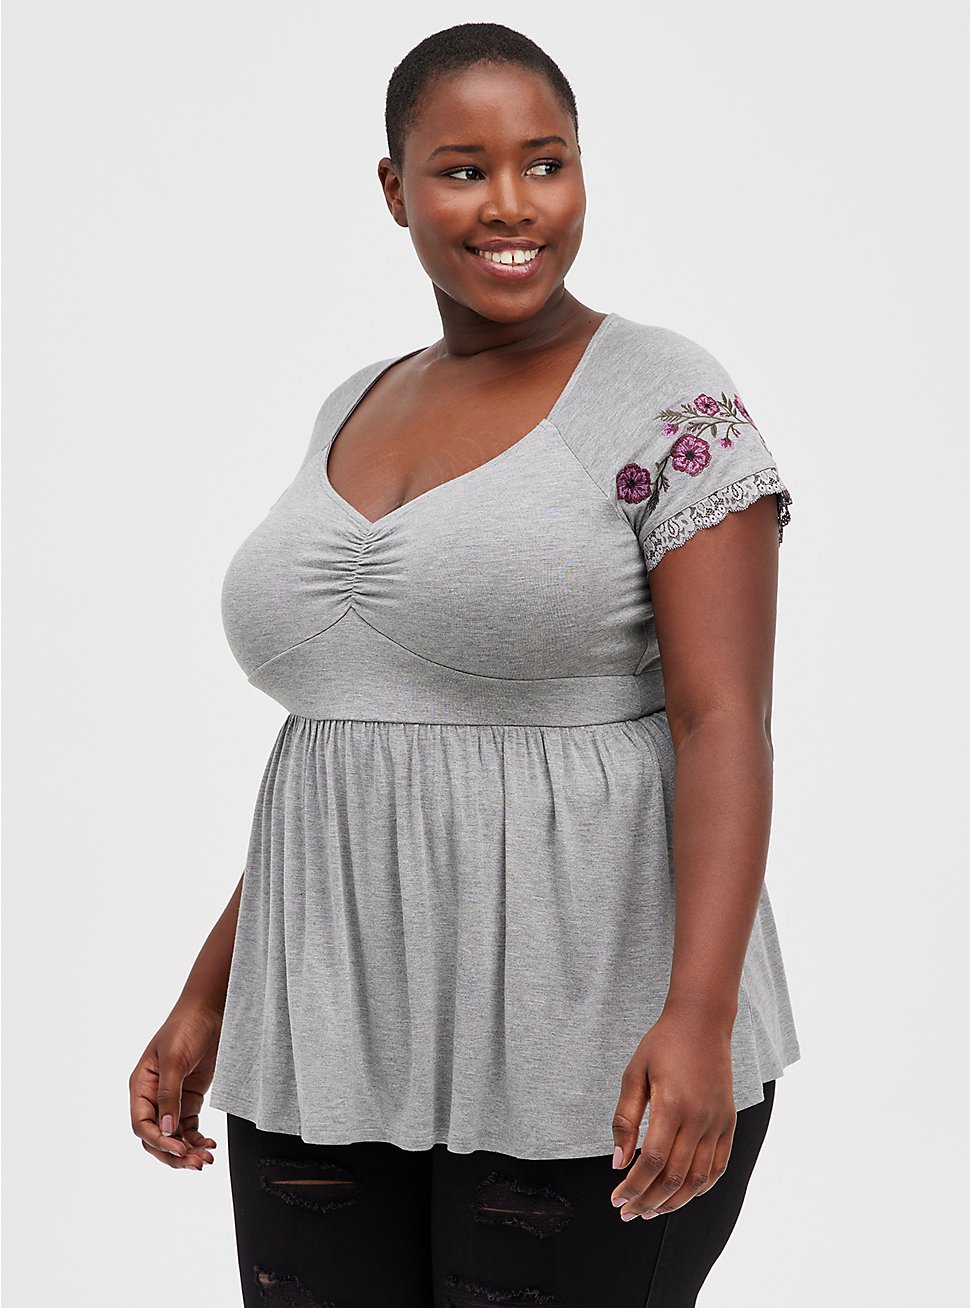 Plus Size Babydoll Top - Super Soft Embroidered Heather Grey, HEATHER GREY, hi-res